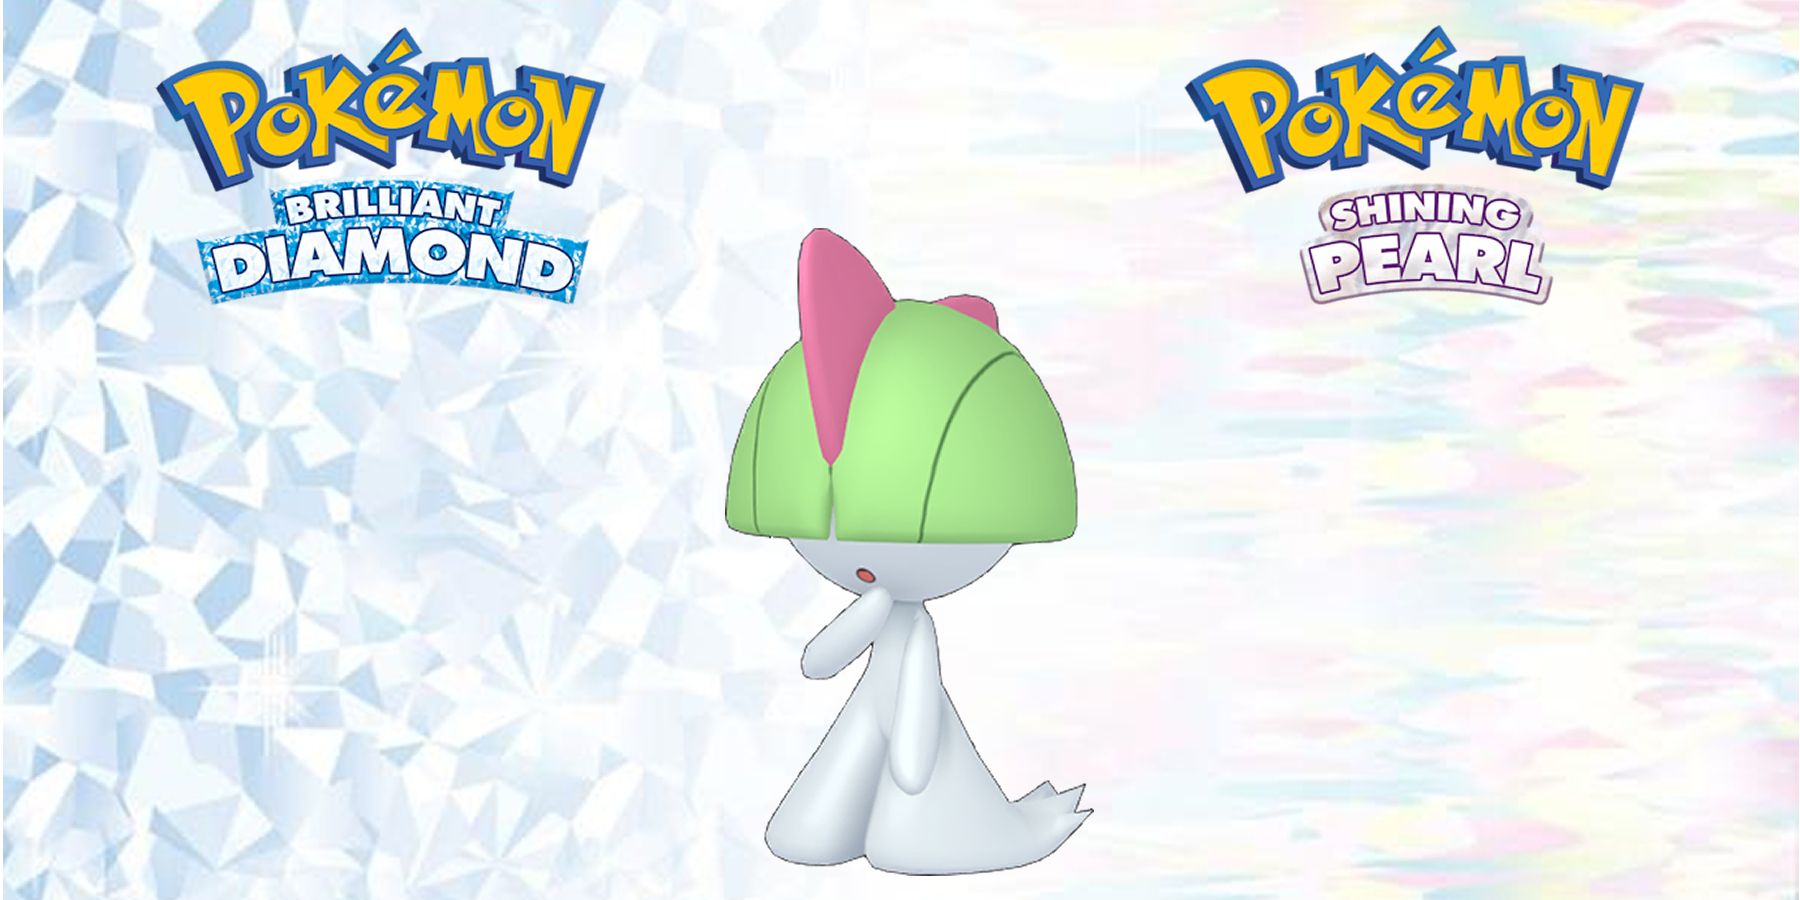 Pokemon Brilliant Diamond & Shining Pearl Where to Find Ralts and How to Evolve It